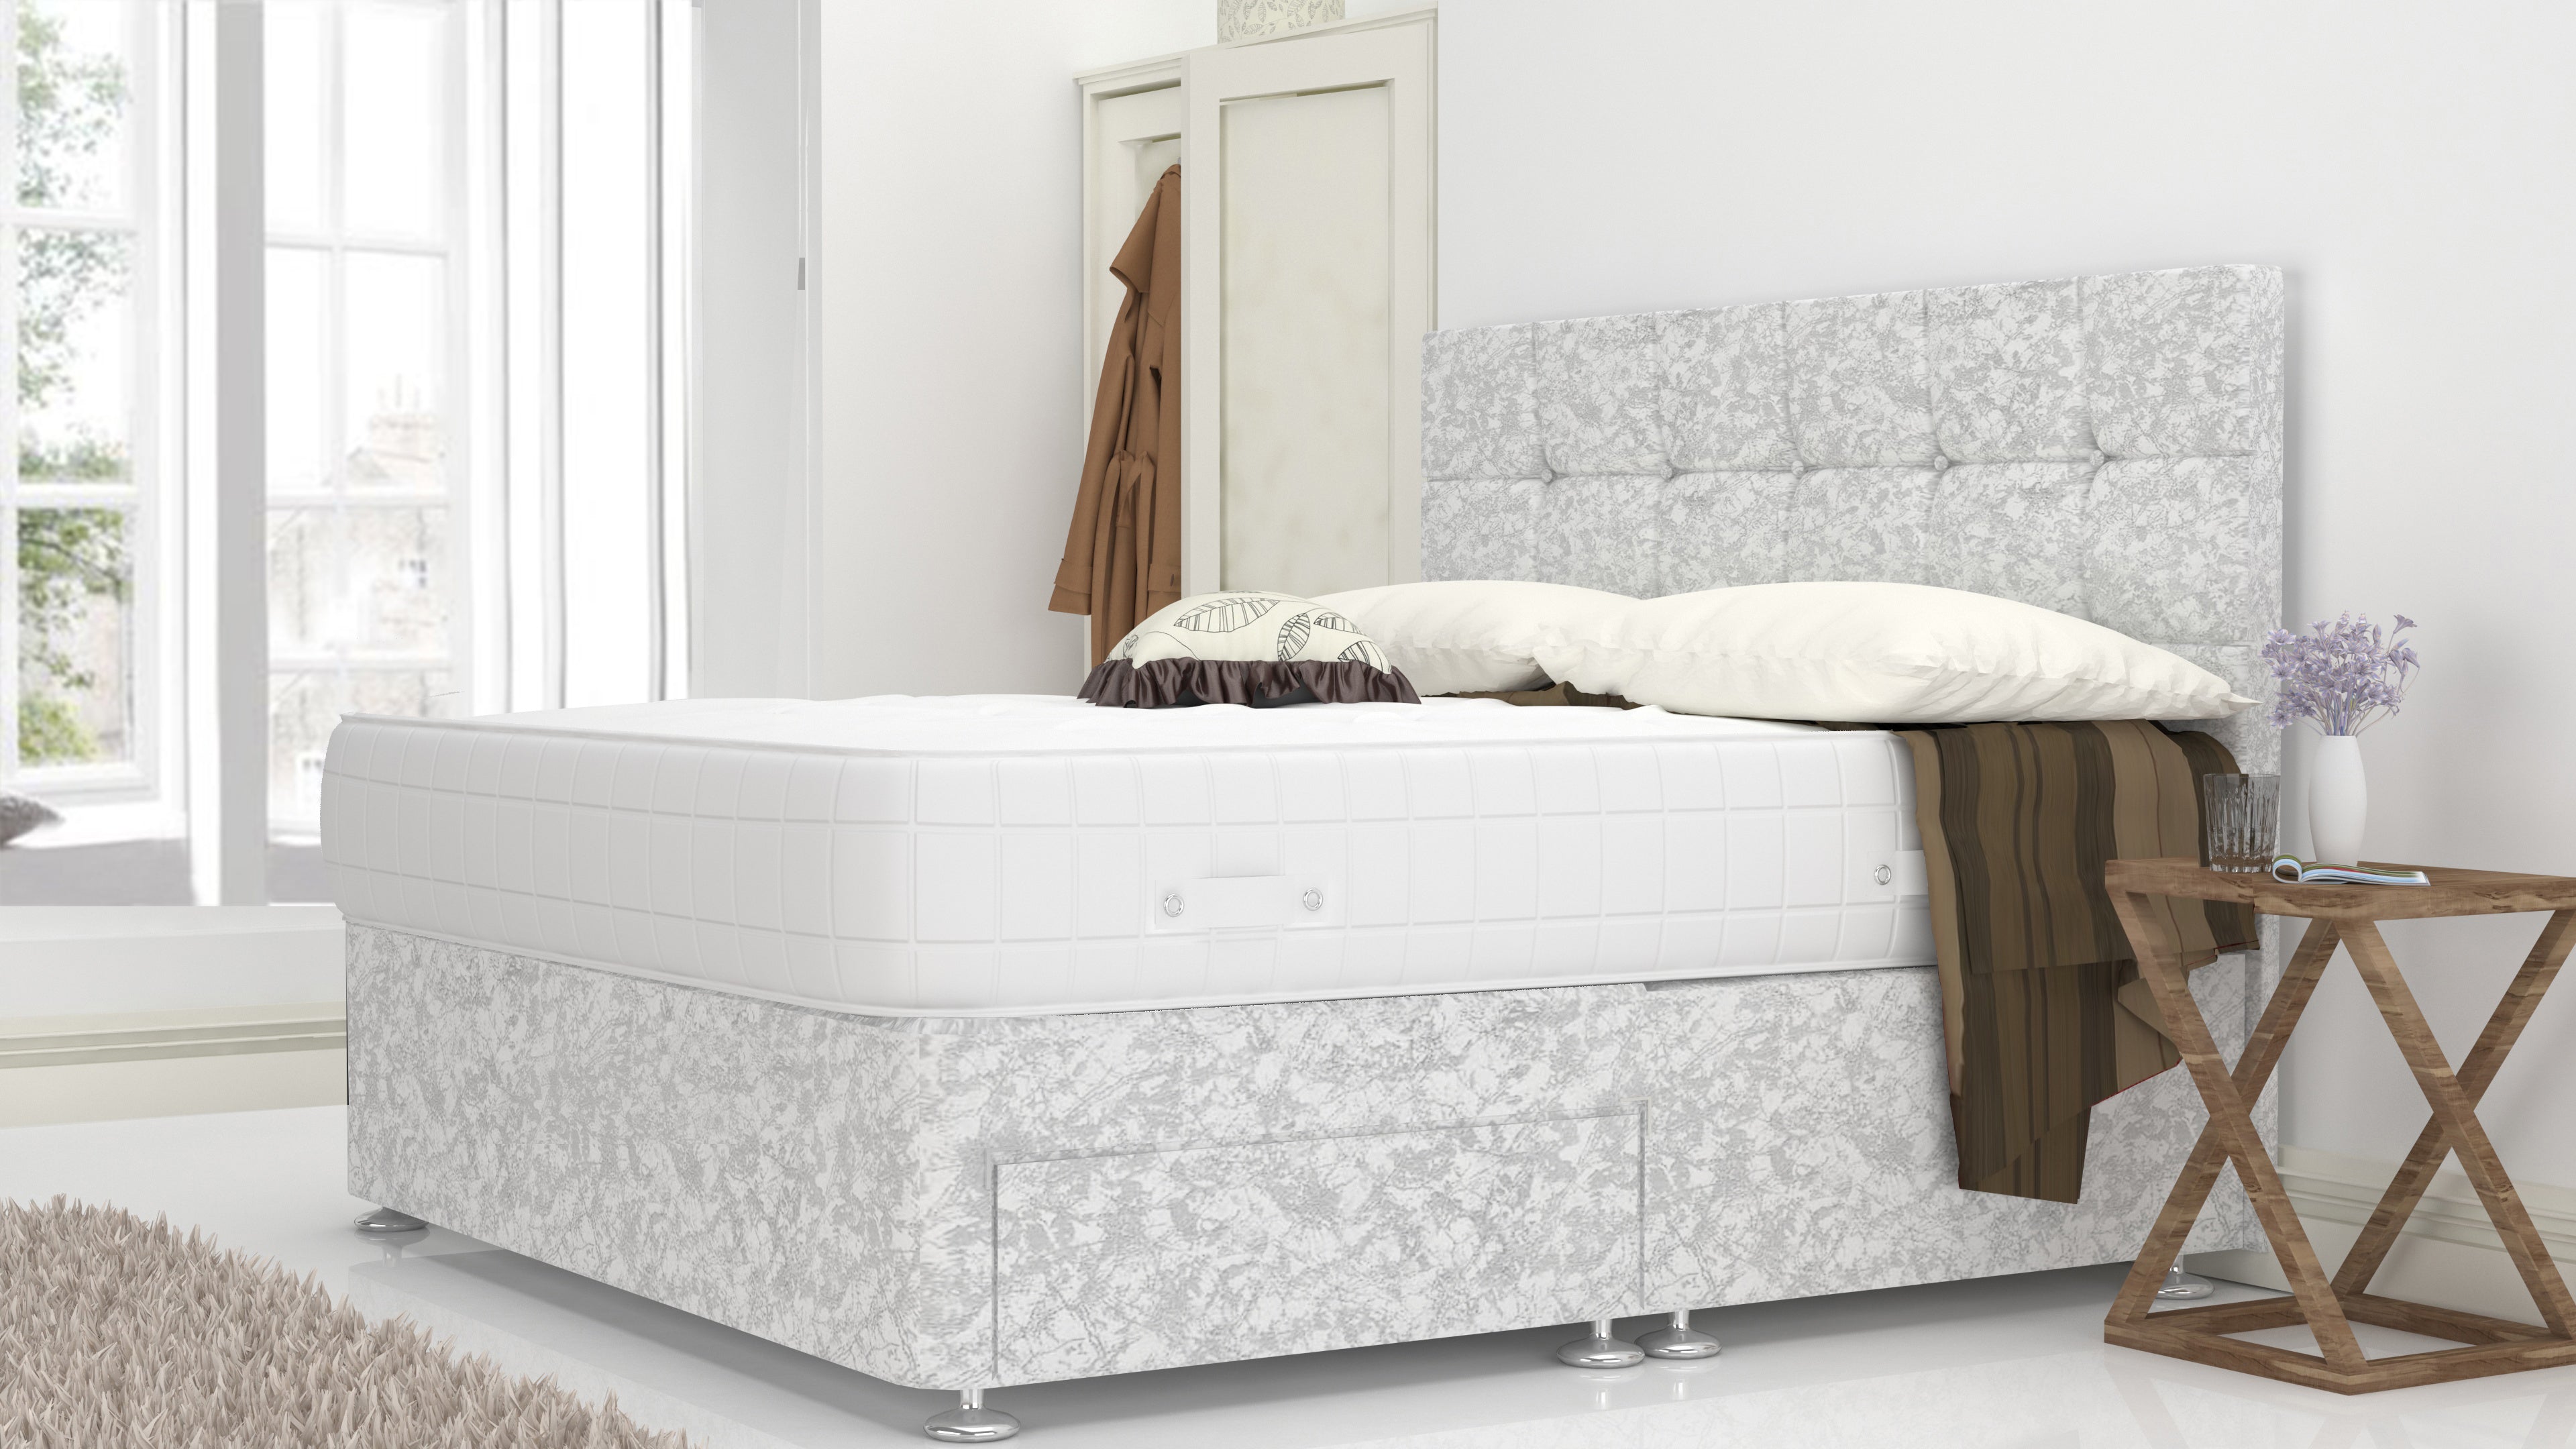 White Crushed Velvet 3 Feet Divan Bed With Cube Headboard (Included Feet) And Free Orthopedic Mattress